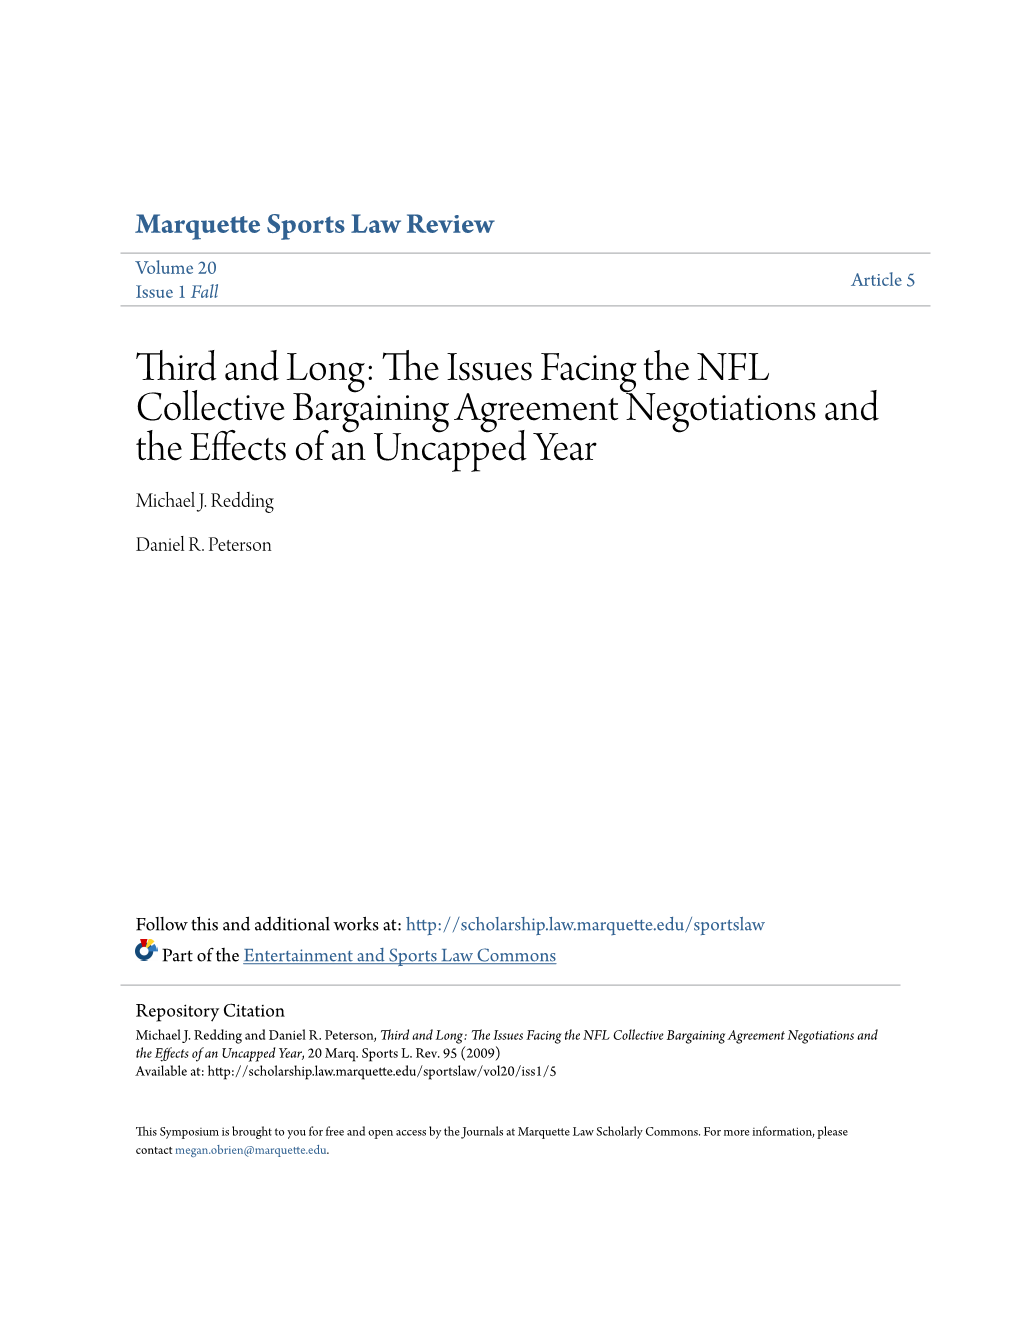 The Issues Facing the NFL Collective Bargaining Agreement Negotiations and the Effects of an Uncapped Year, 20 Marq